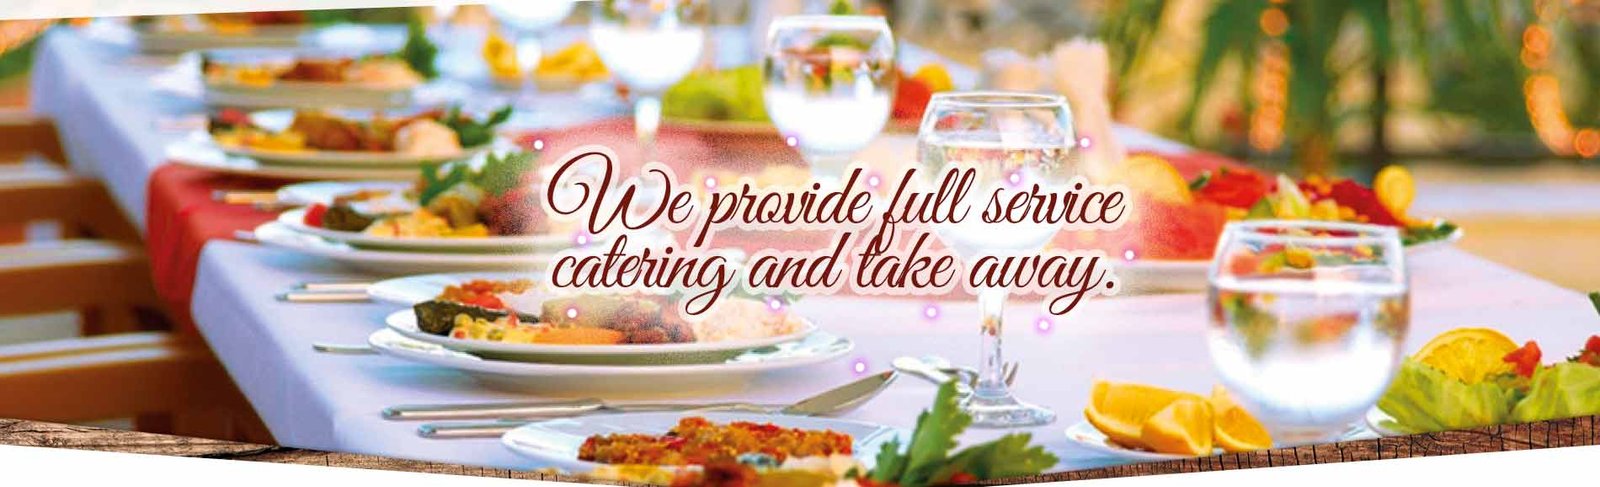 Catering and Restaurant Services in Gage County